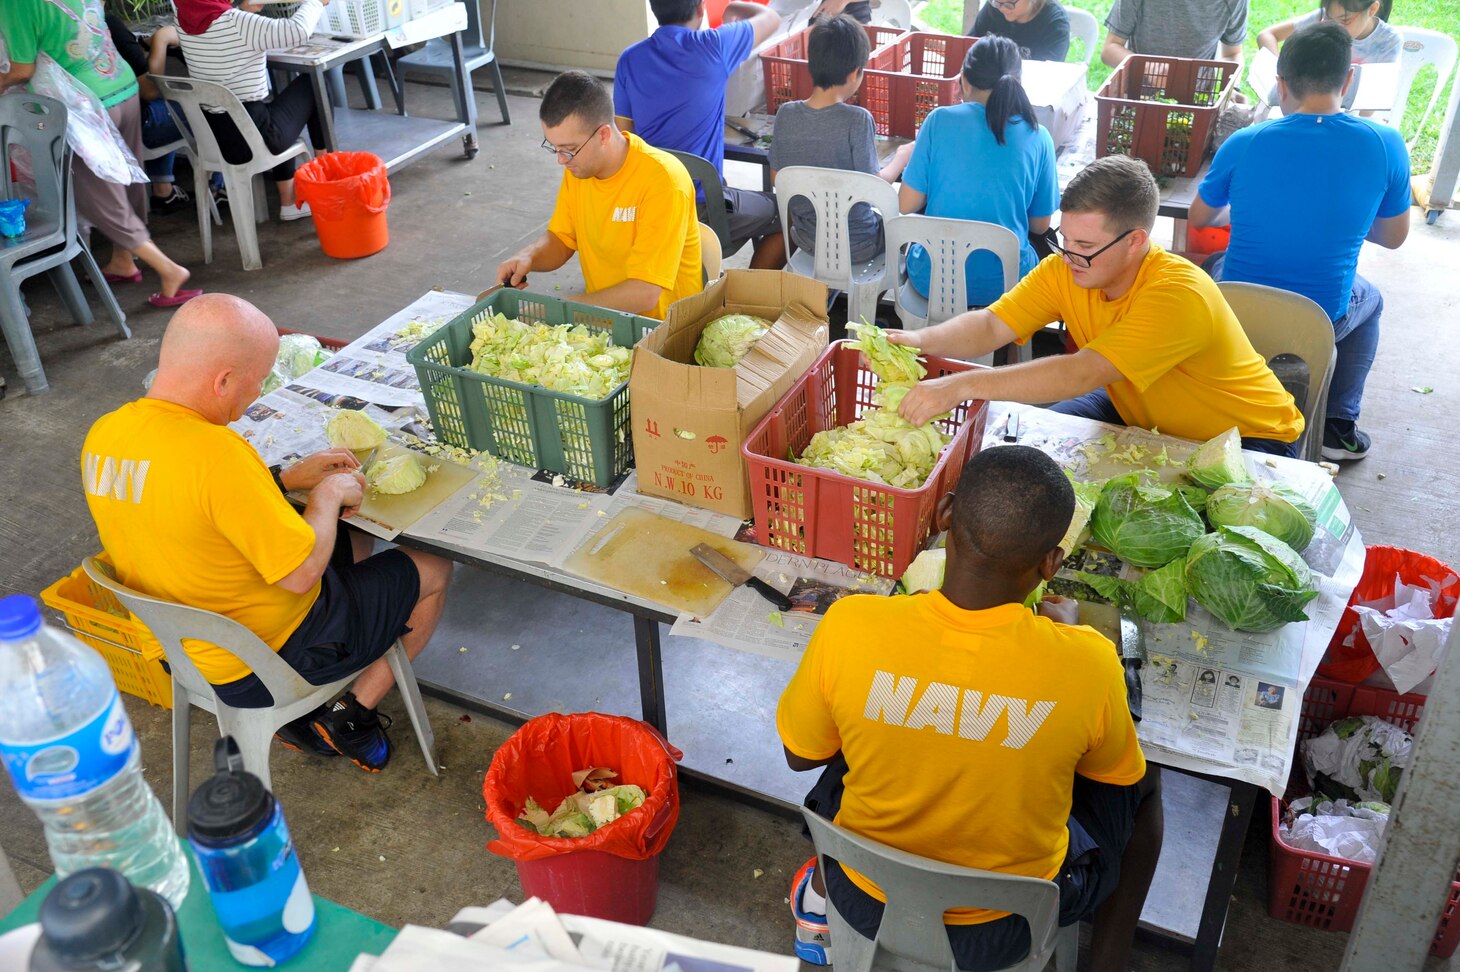 SINGAPORE (Dec. 20, 2018) – Sailors assigned to the submarine tender USS Emory S. Land (AS 39) cut cabbage during a community service event at the Willing Hearts Soup Kitchen in Singapore, Dec. 20. Emory S. Land is a forward-deployed expeditionary submarine tender on an extended deployment conducting coordinated tended moorings and afloat maintenance in the U.S. 5th and 7th Fleet areas of operations.